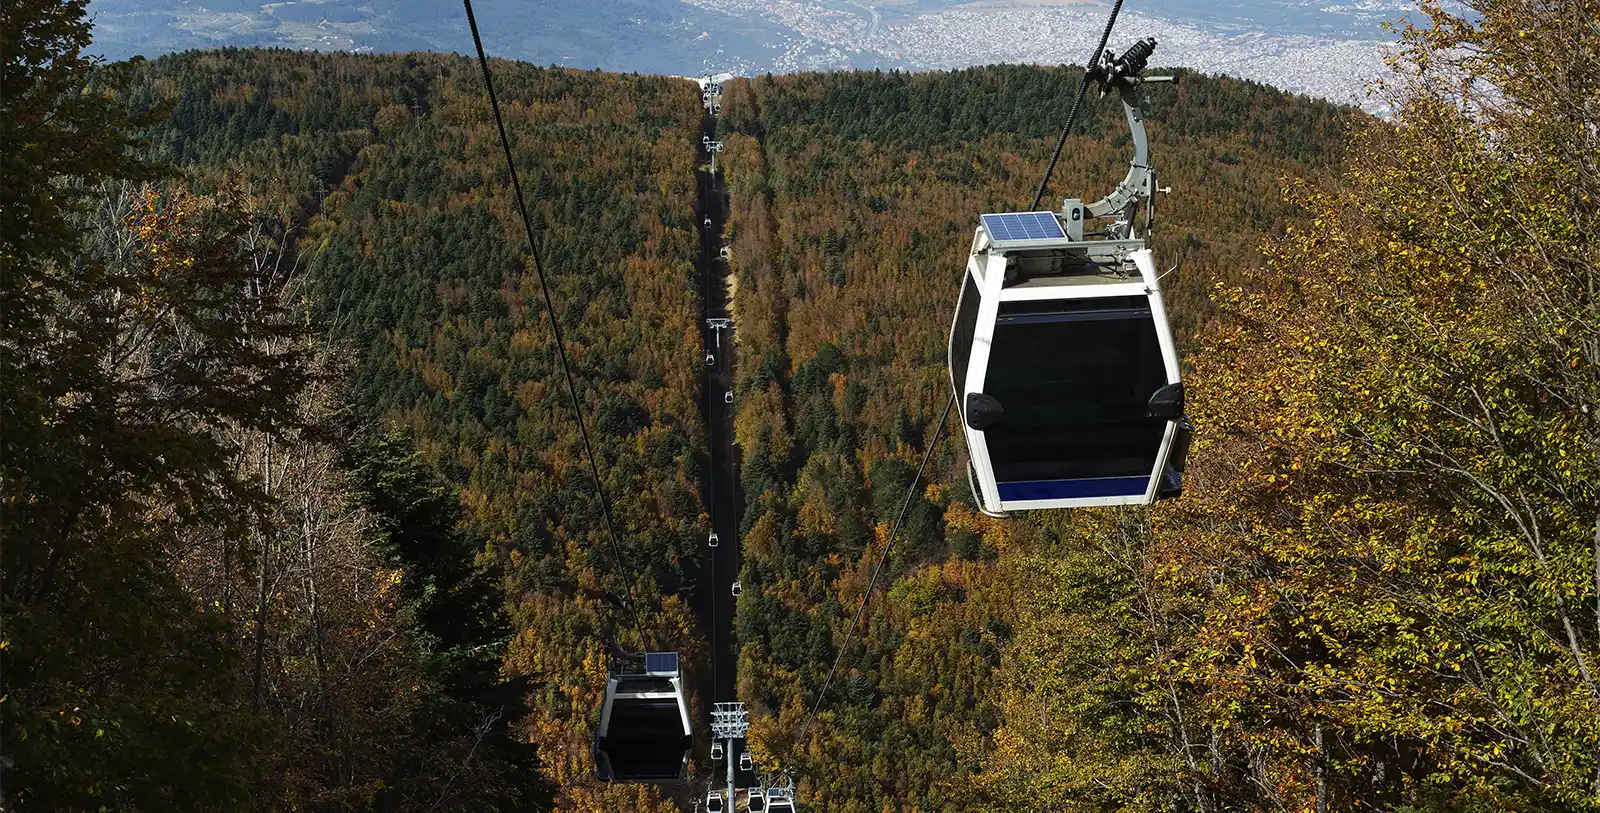 Bursa Telecabine is passing by thousands of colored trees in an autumn forest view